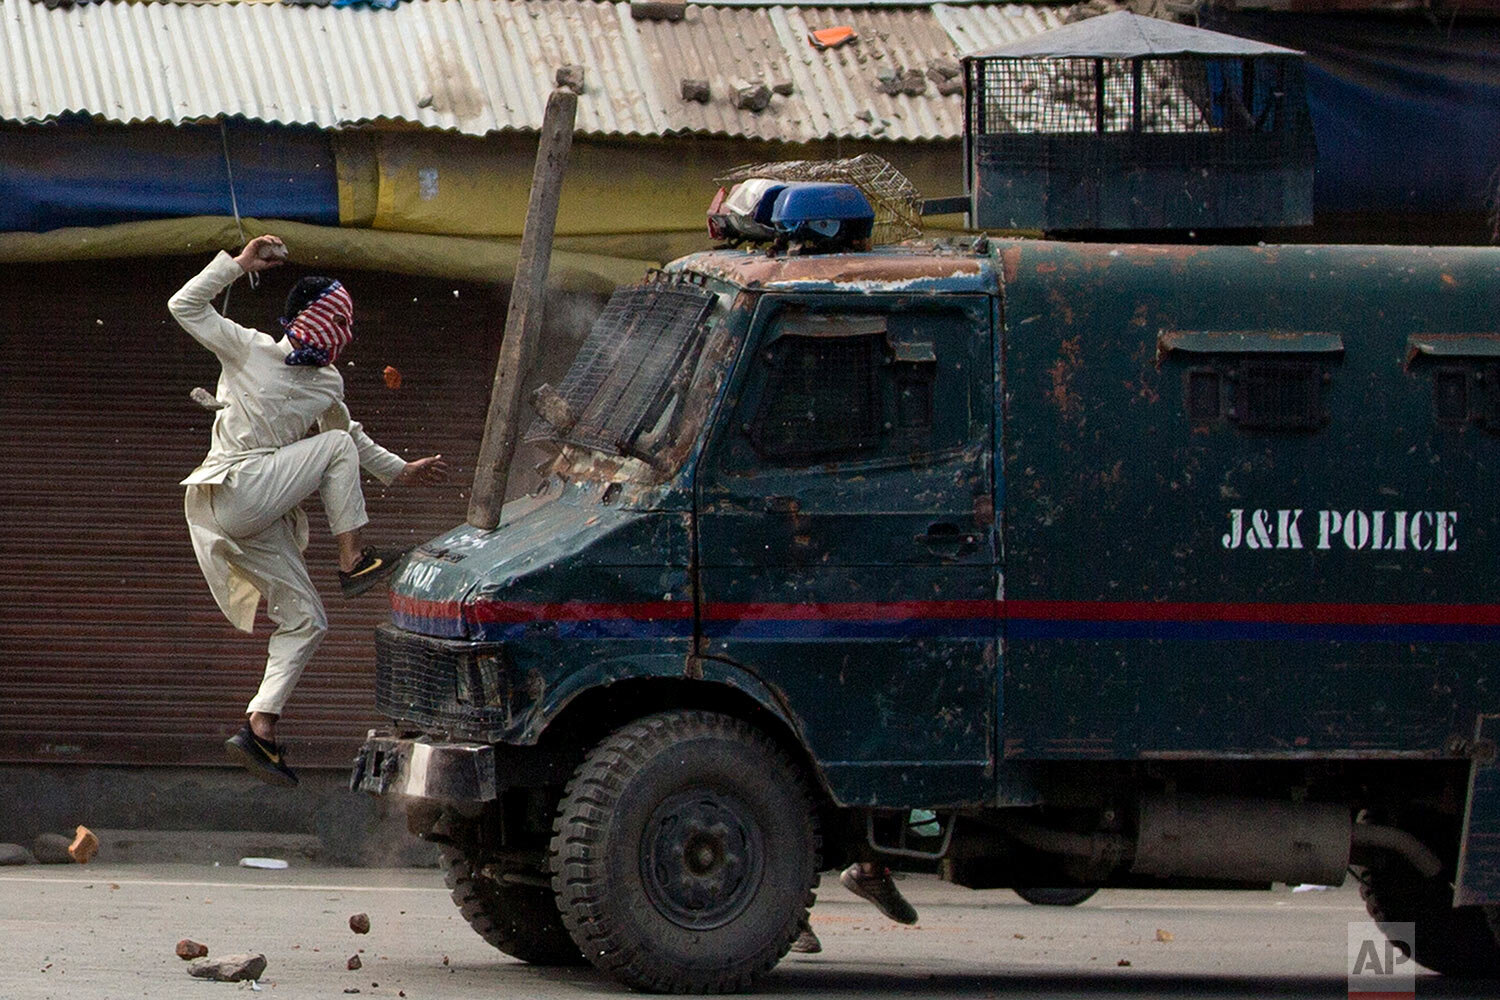  A masked Kashmiri protester jumps on an Indian police armored vehicle as he throws stones at it during a protest in Srinagar, Indian-controlled Kashmir on May 31, 2019. (AP Photo/Dar Yasin) 